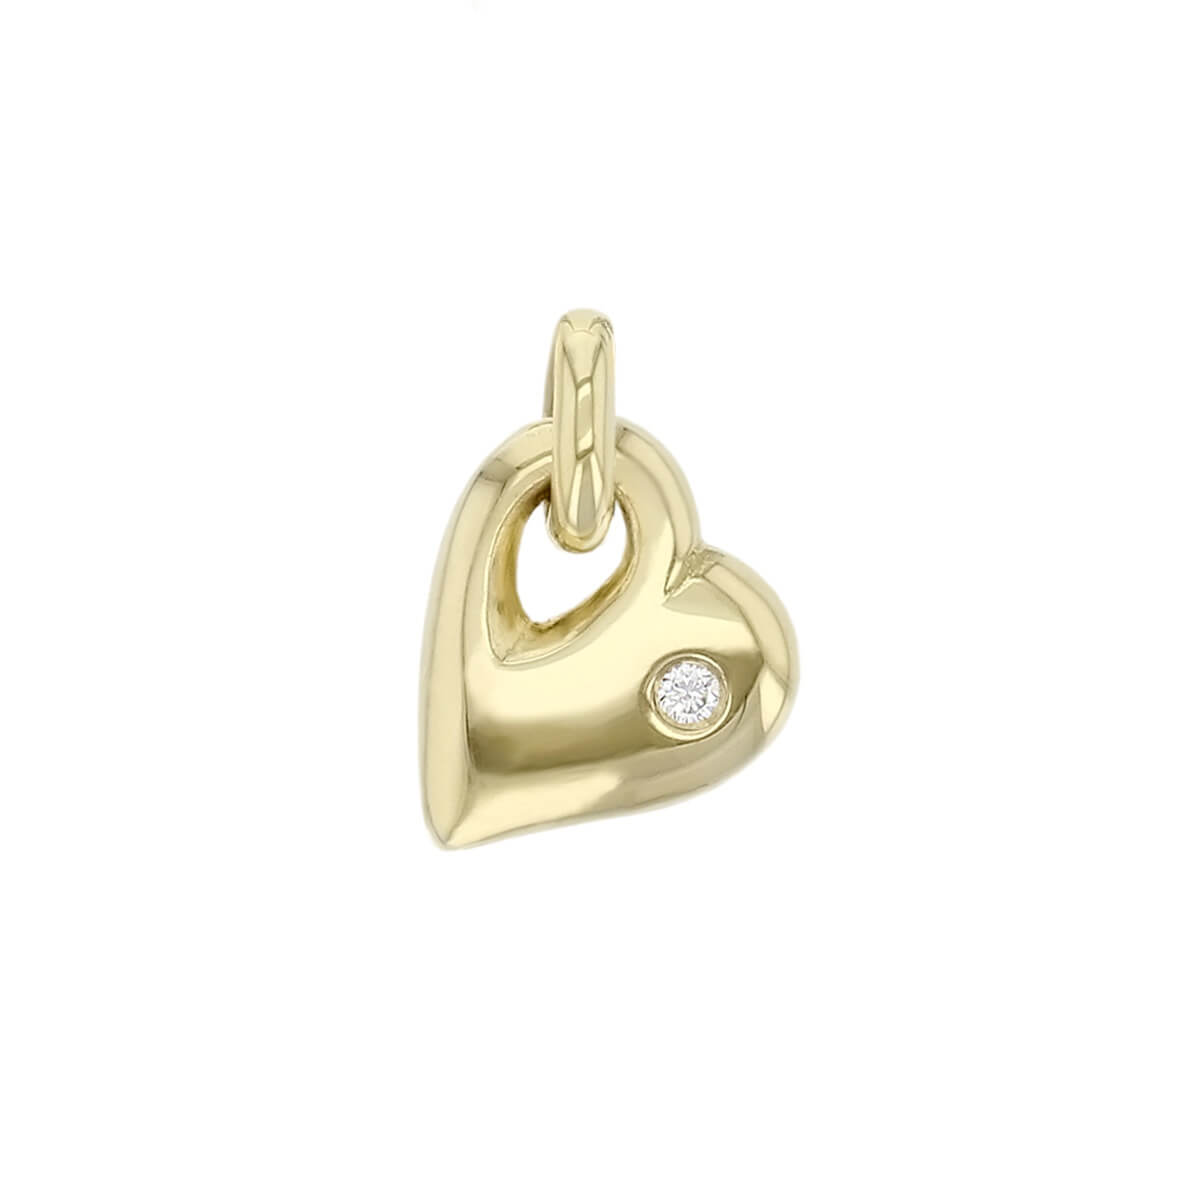 Faller 18ct yellow gold ladies heart pendant with chain, round brilliant cut diamond,18kt, designer, handmade by Faller, Derry/ Londonderry, hand crafted, precious jewellery, jewelry, love